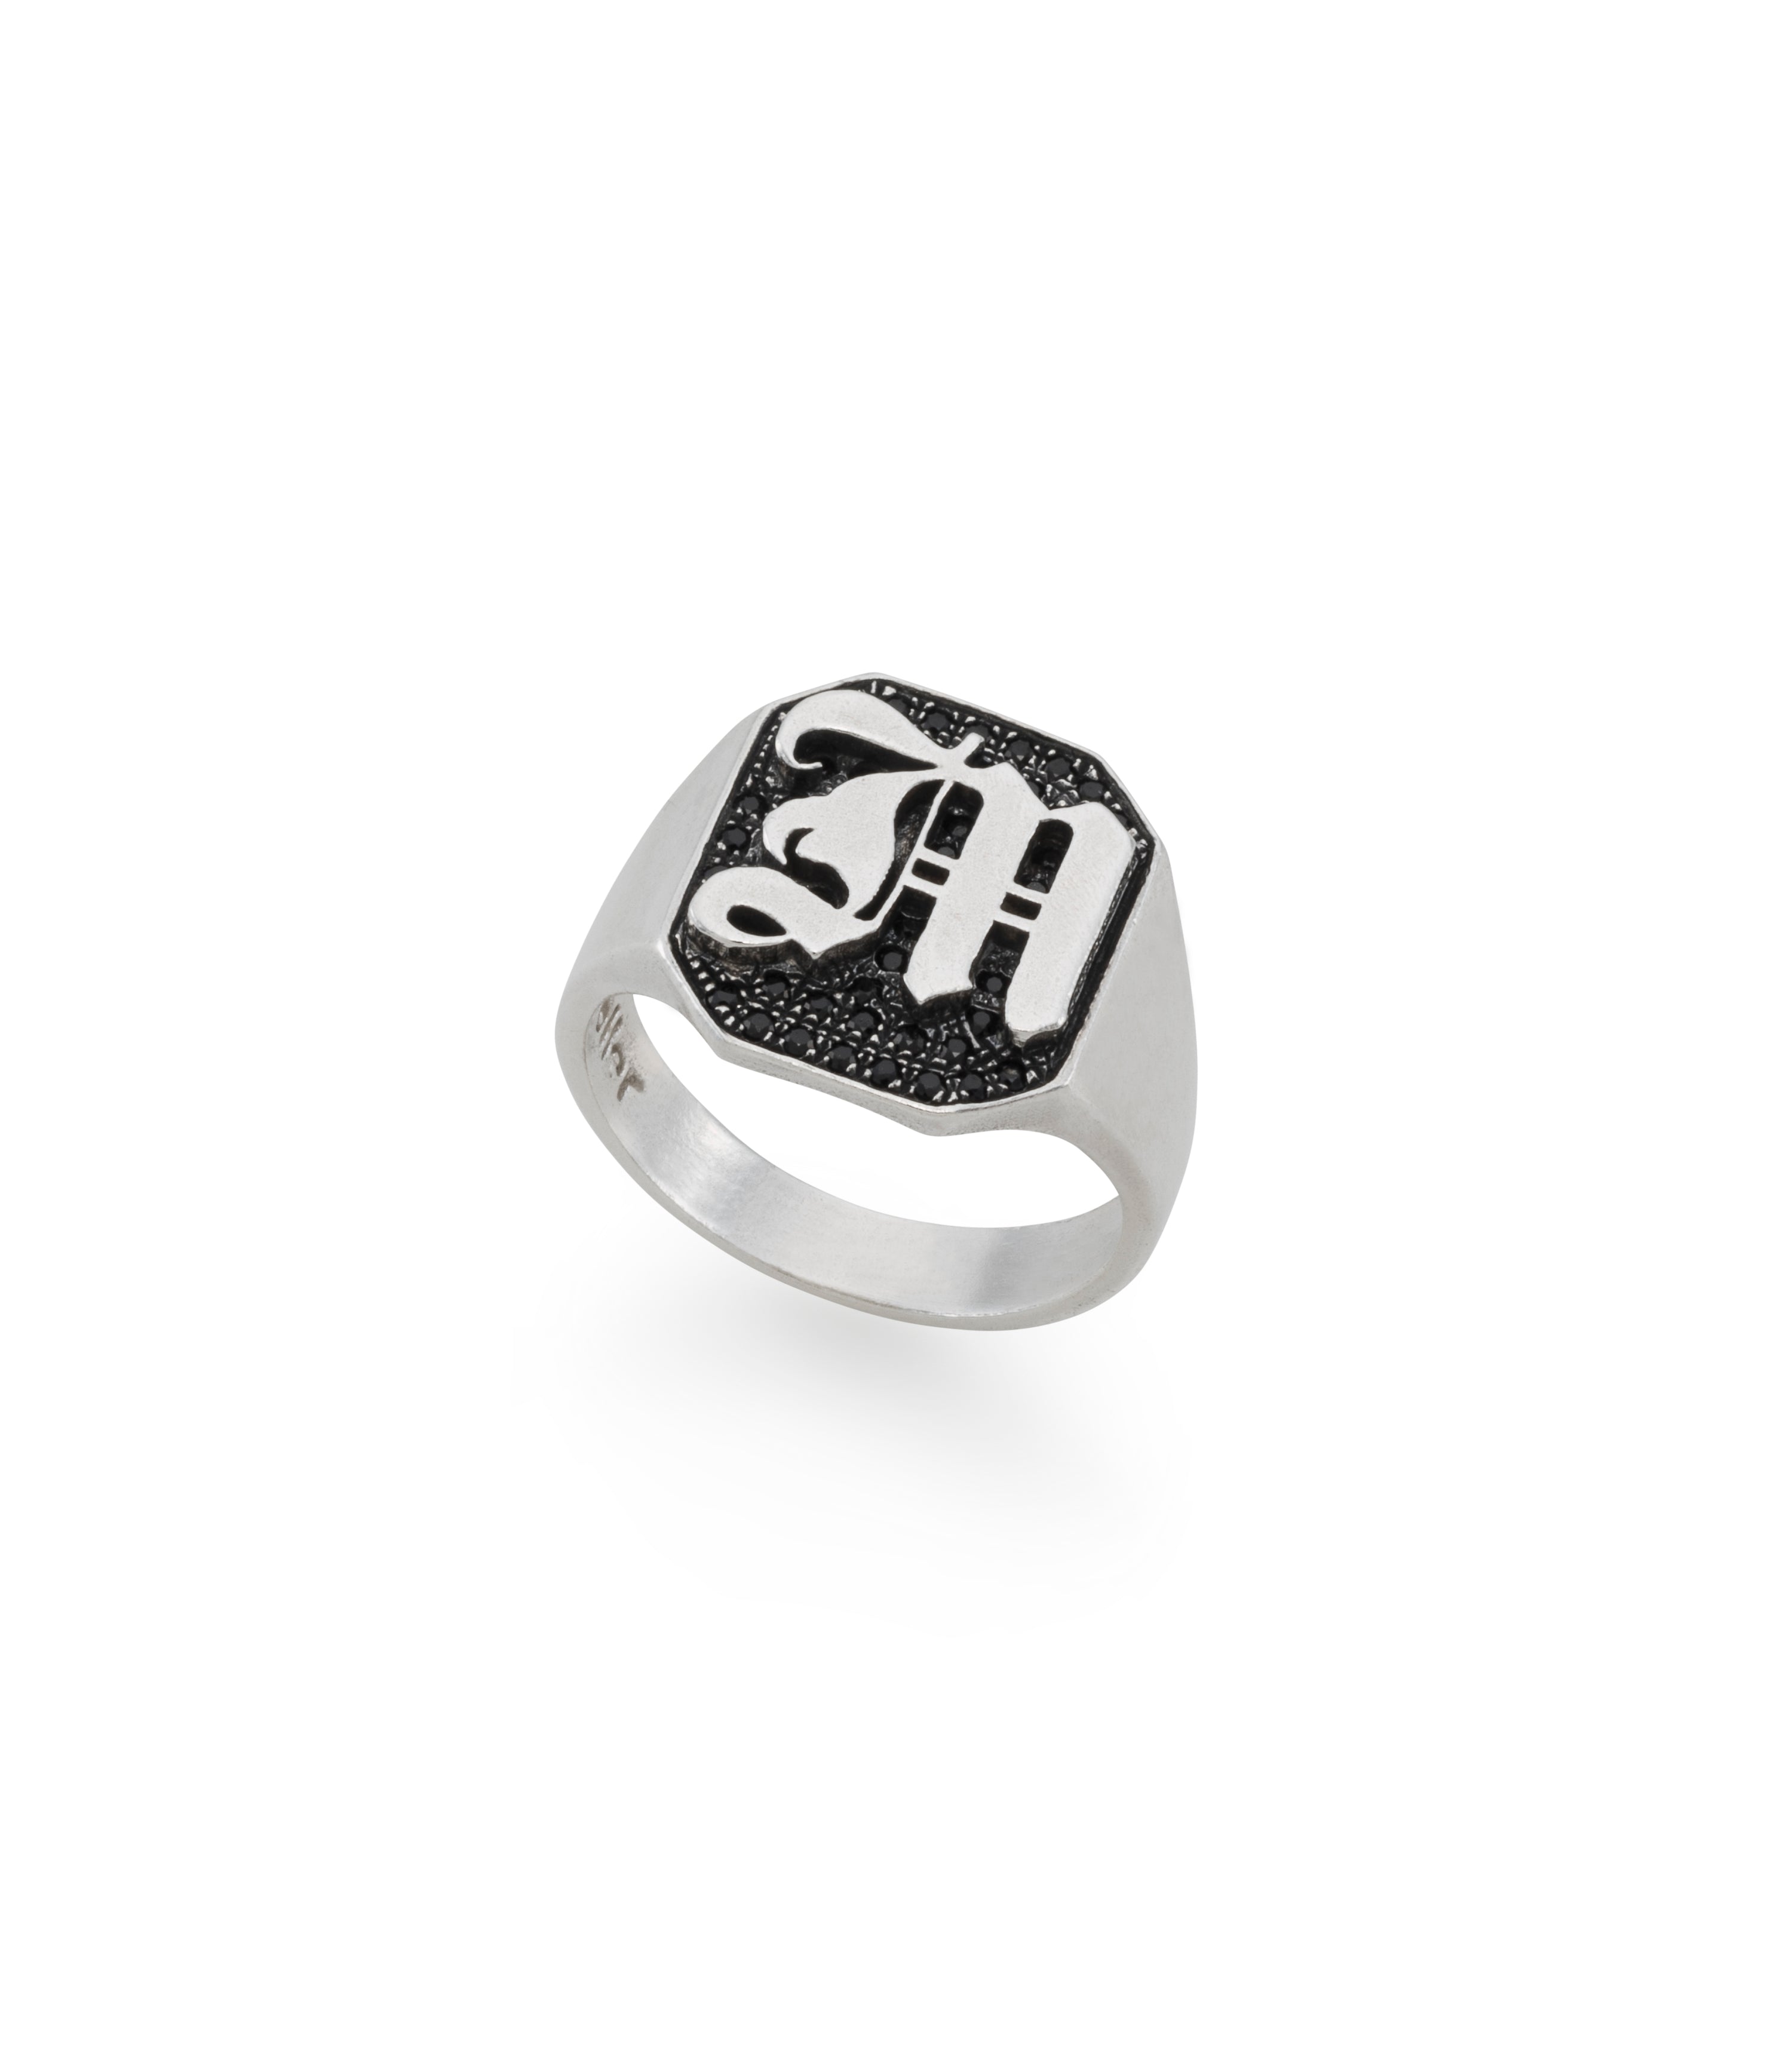 silver signet ring with gothic letter and black stones